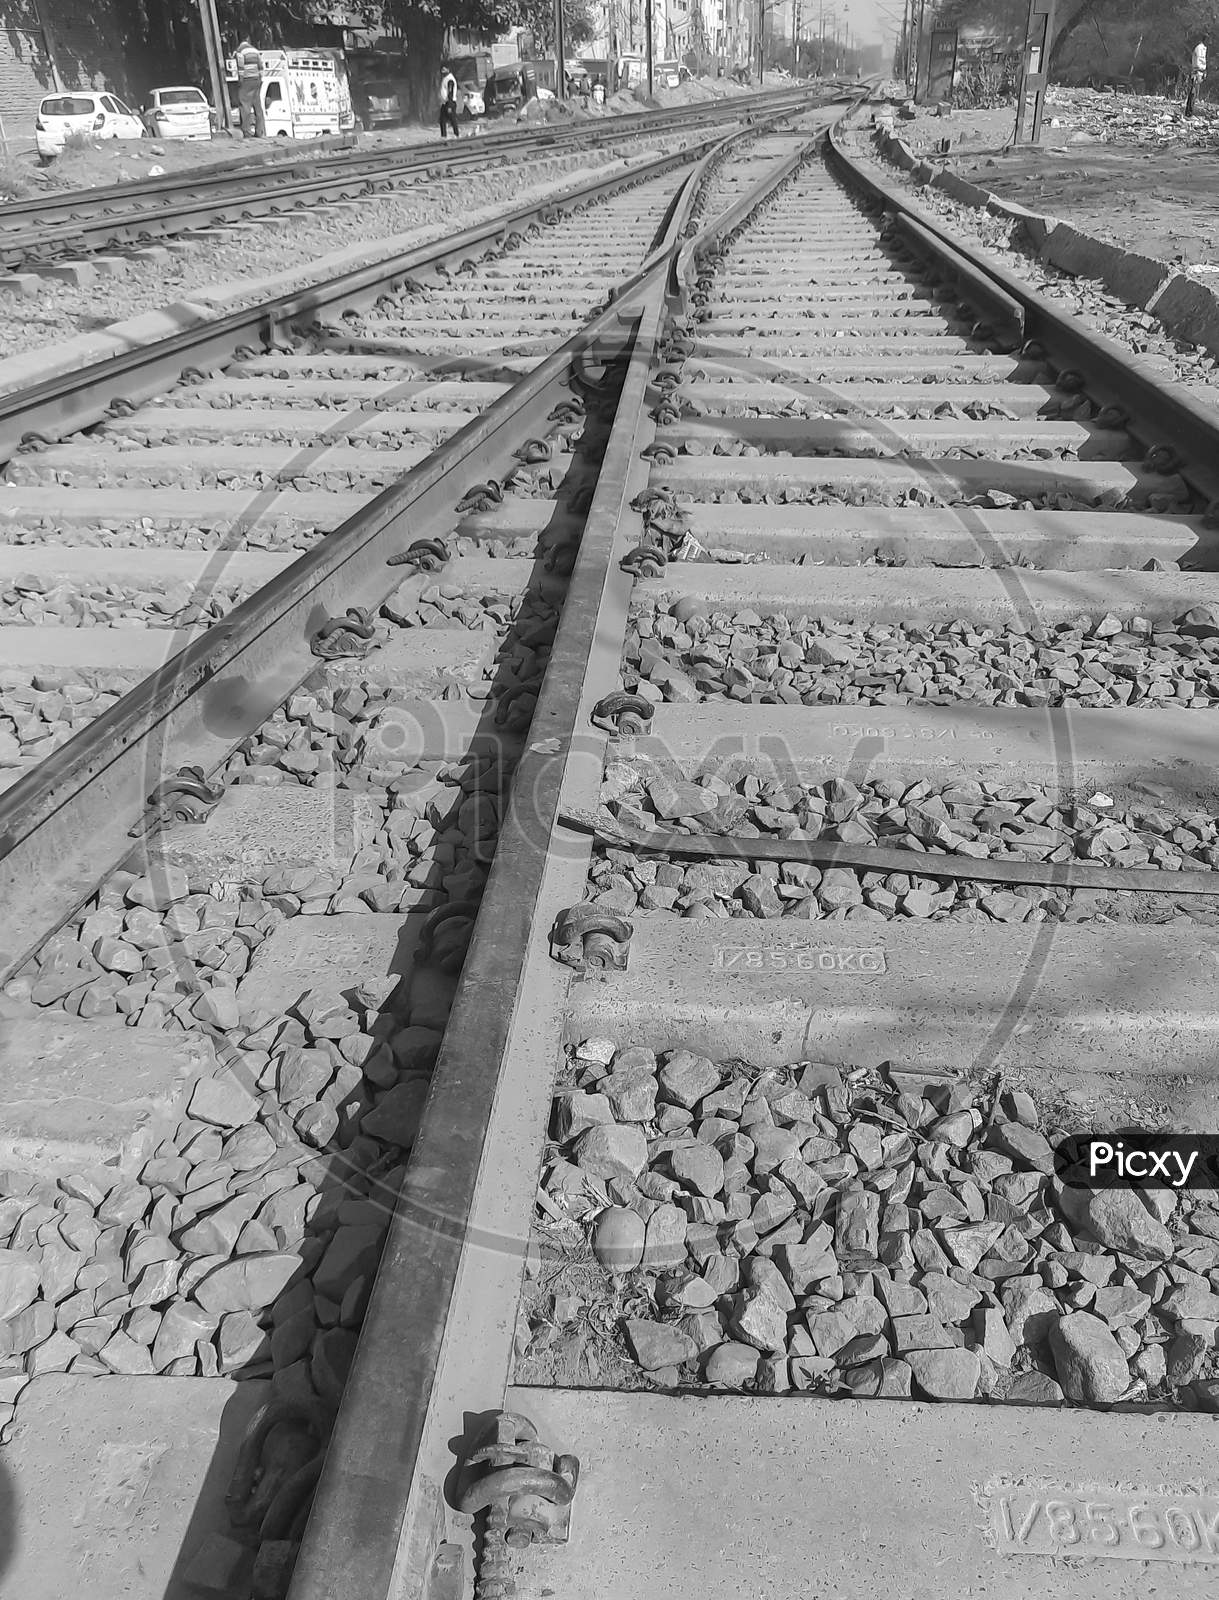 View Of Railway Tracks From The Middle During Day Time In Delhi India, Indian Railways Track View, Indian Railway Junction. Heavy Industry – Black And White